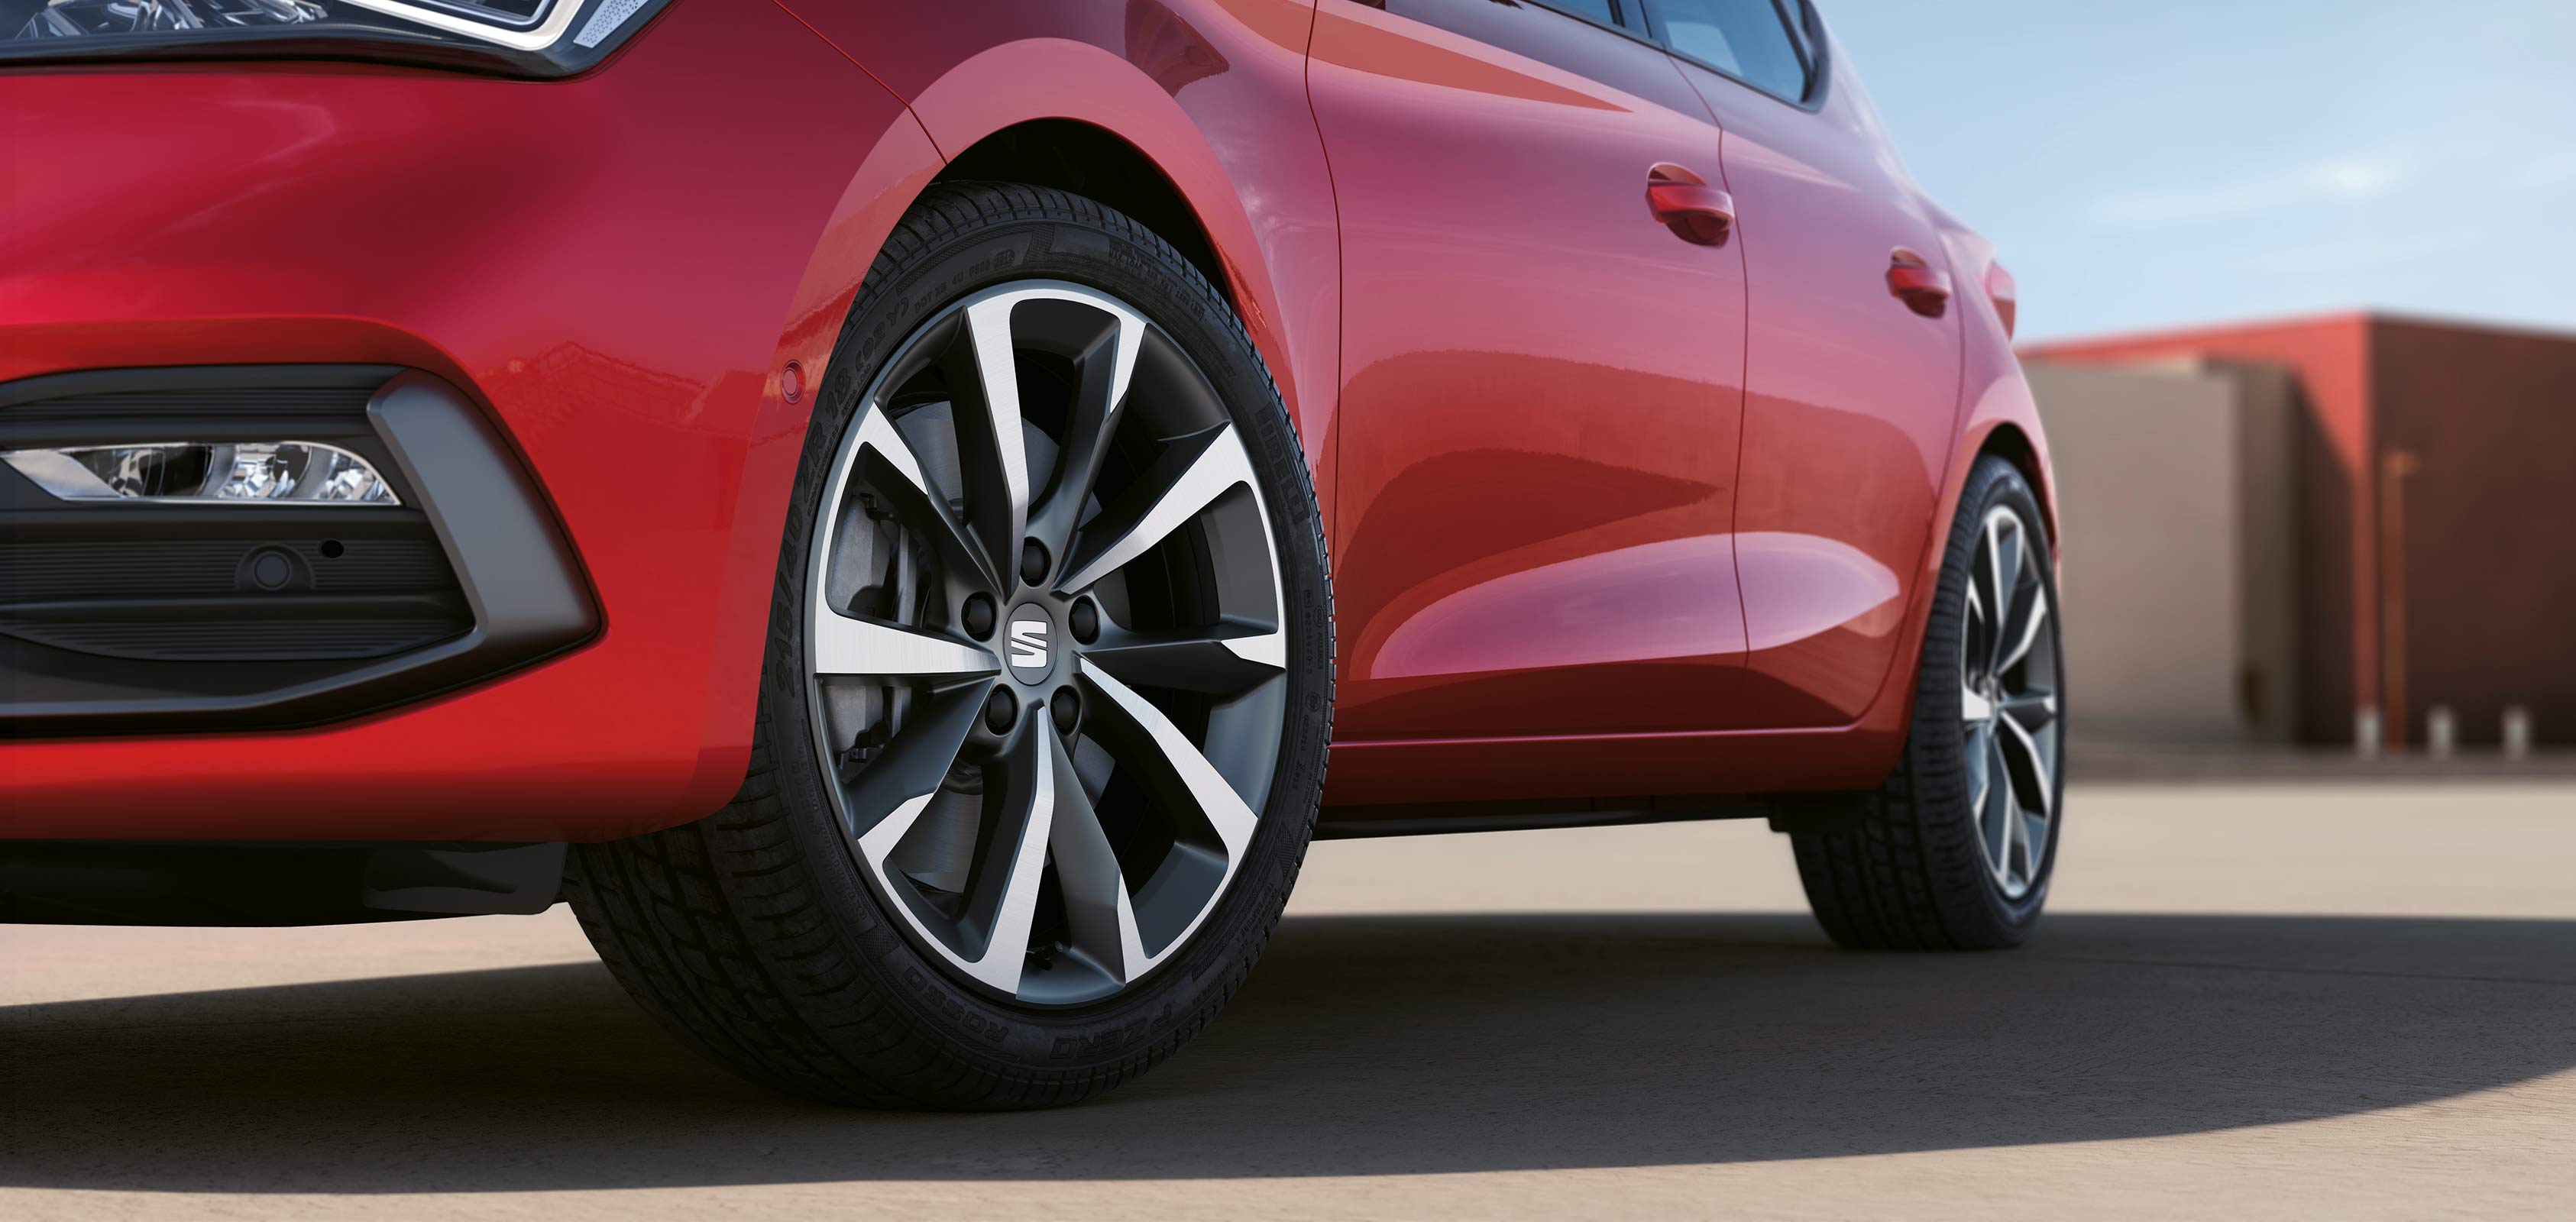 SEAT Leon desire red colour with an exclusive alloy wheel.